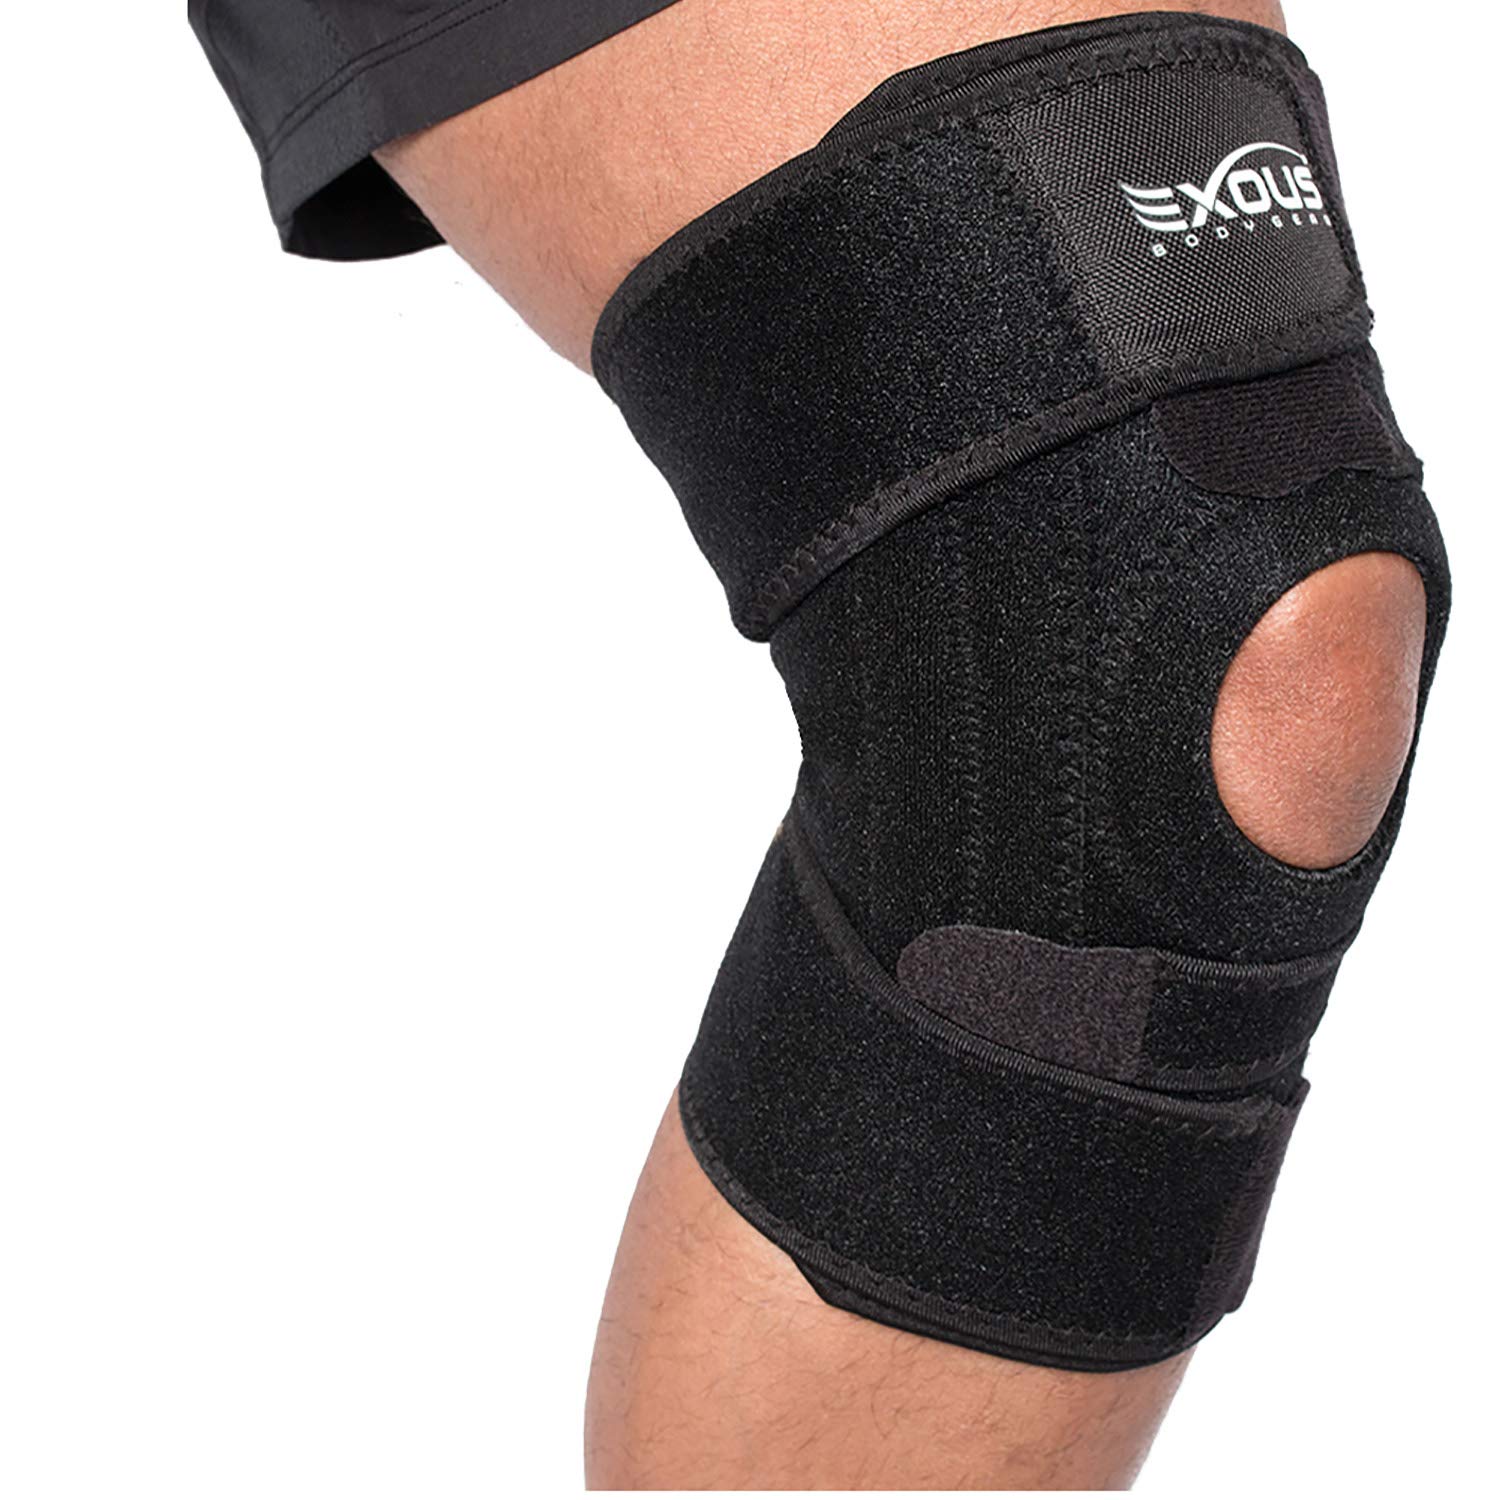 EXOUS Knee Brace Support Protector